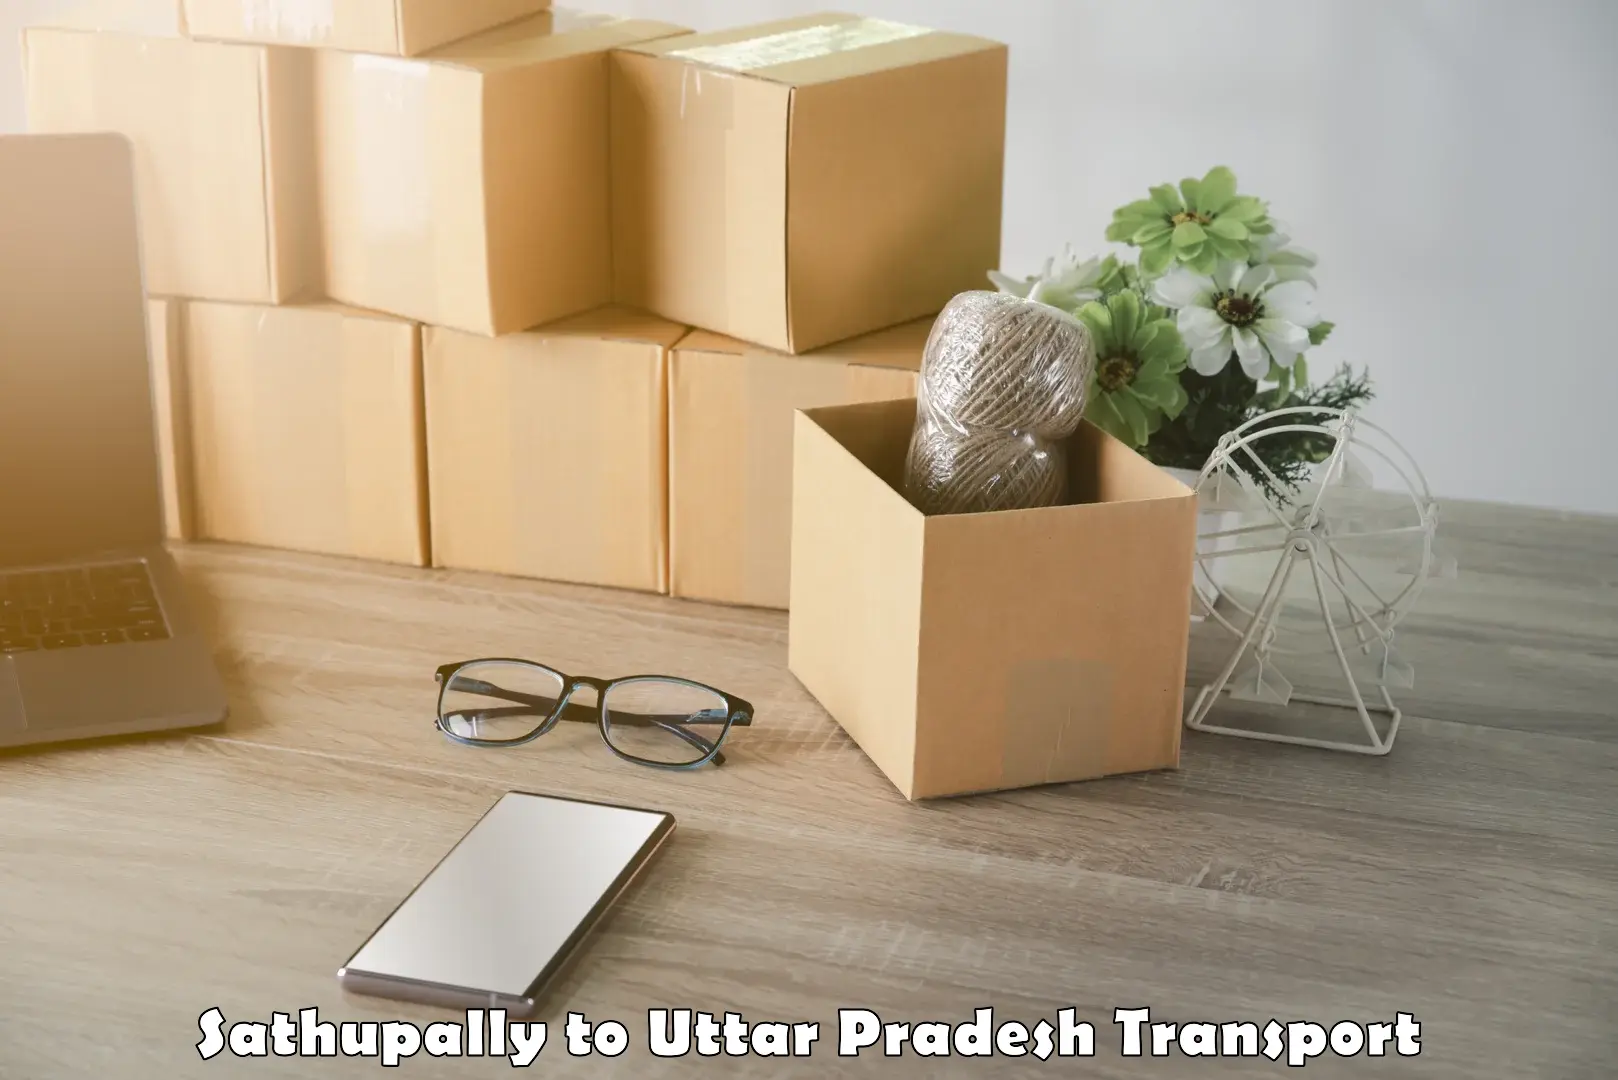 Bike shipping service Sathupally to Sultanpur Avadh